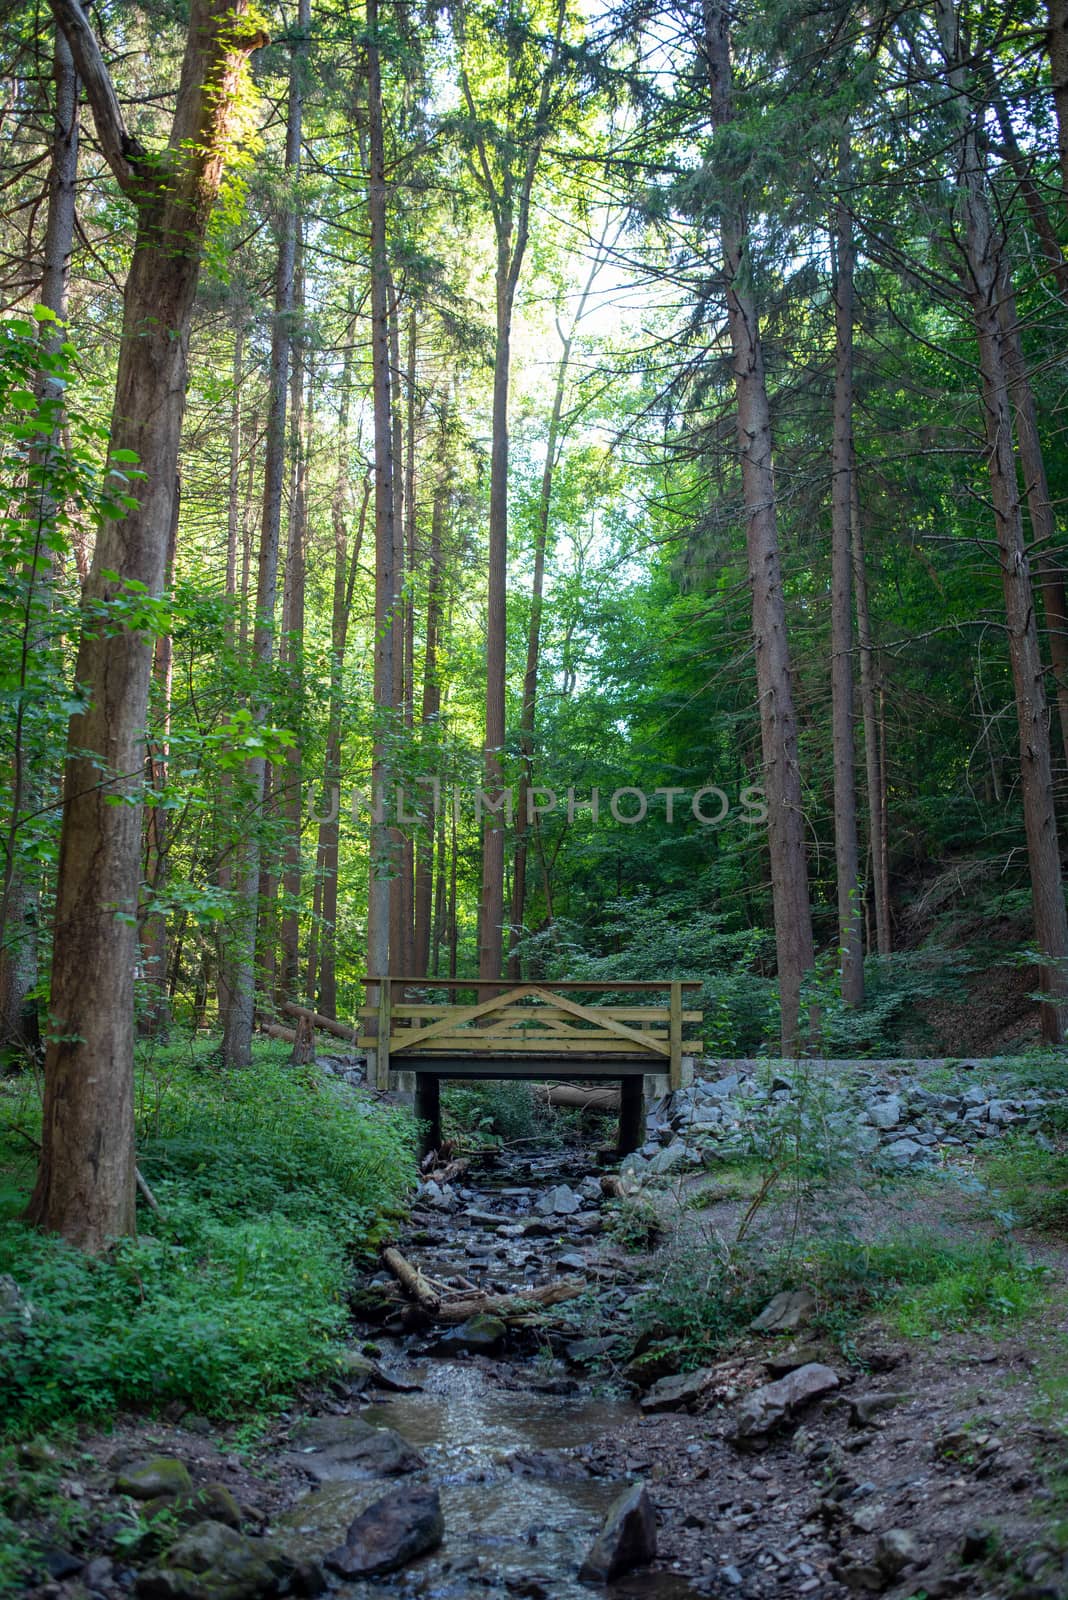 A woodland stream flows underneath the beautiful wooden bridge. Towering green trees surround it.